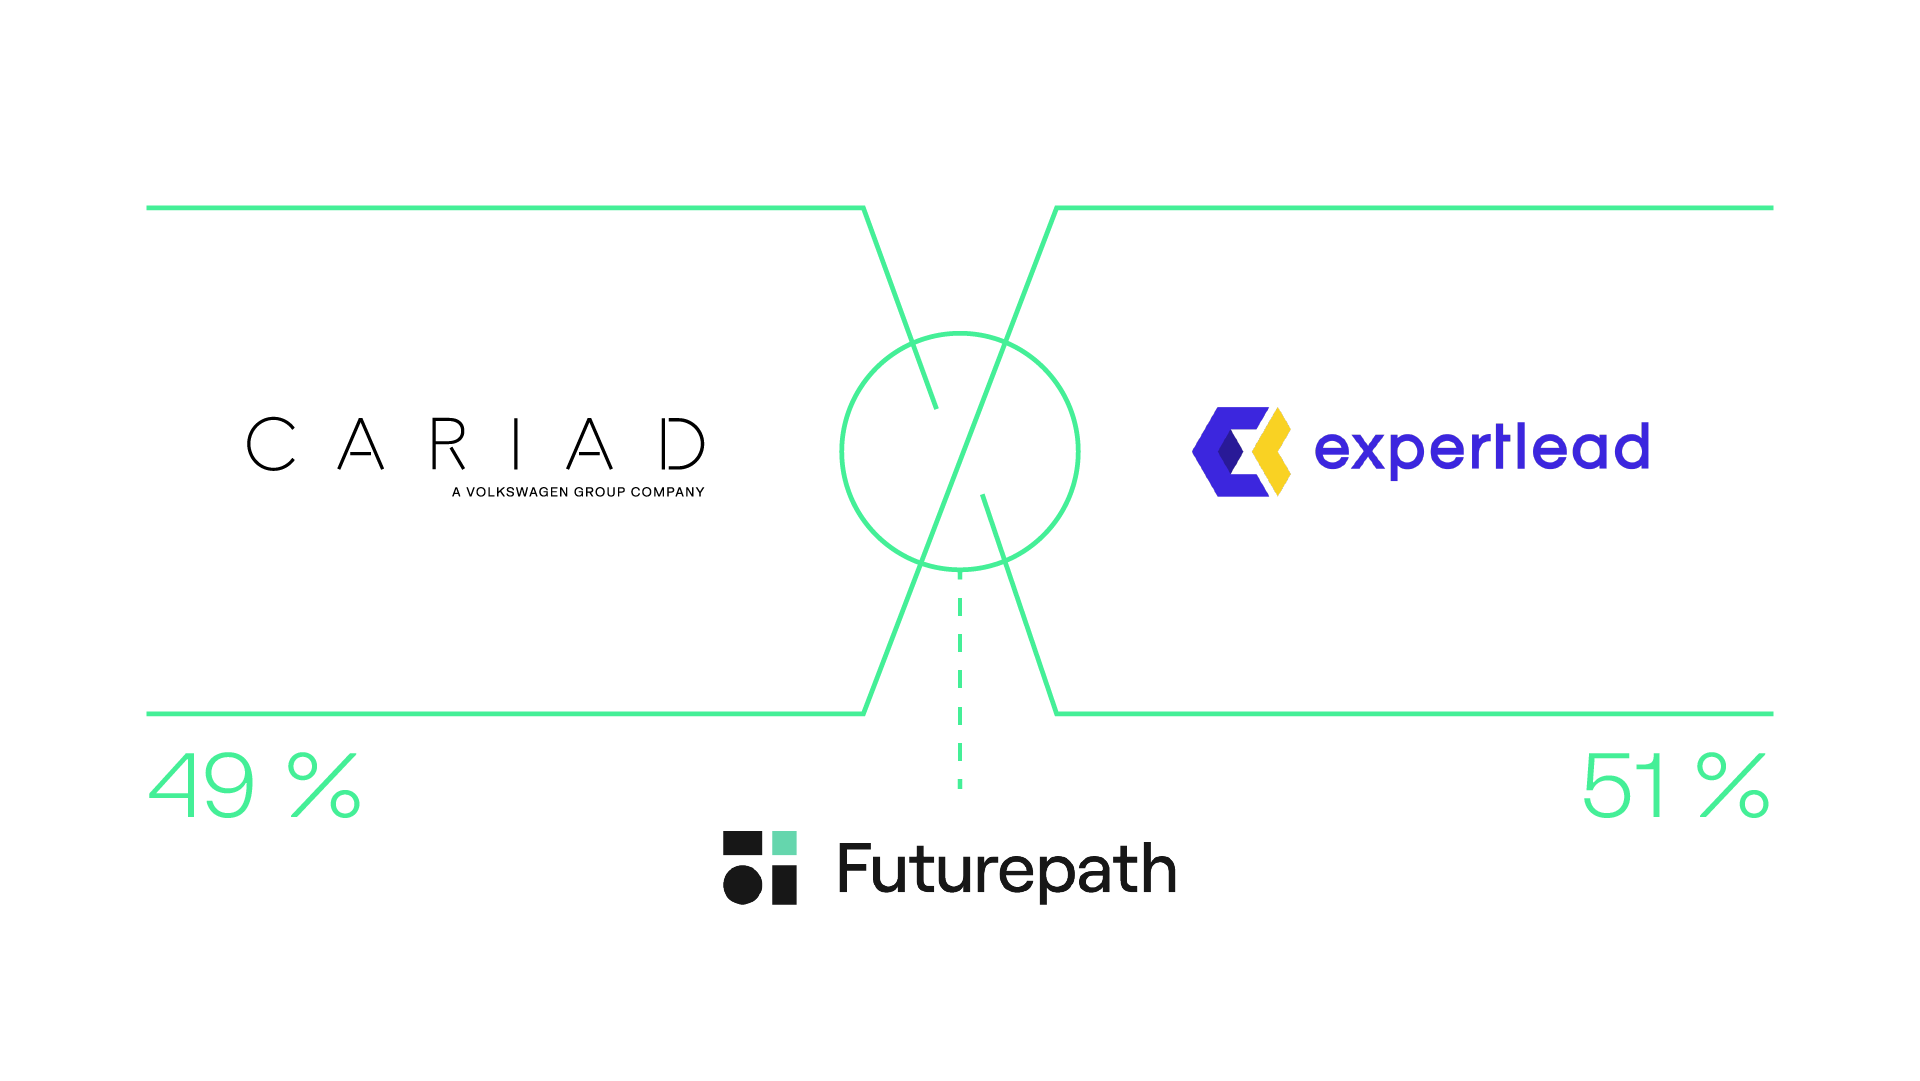 CARIAD founds Futurepath joint venture with expertlead